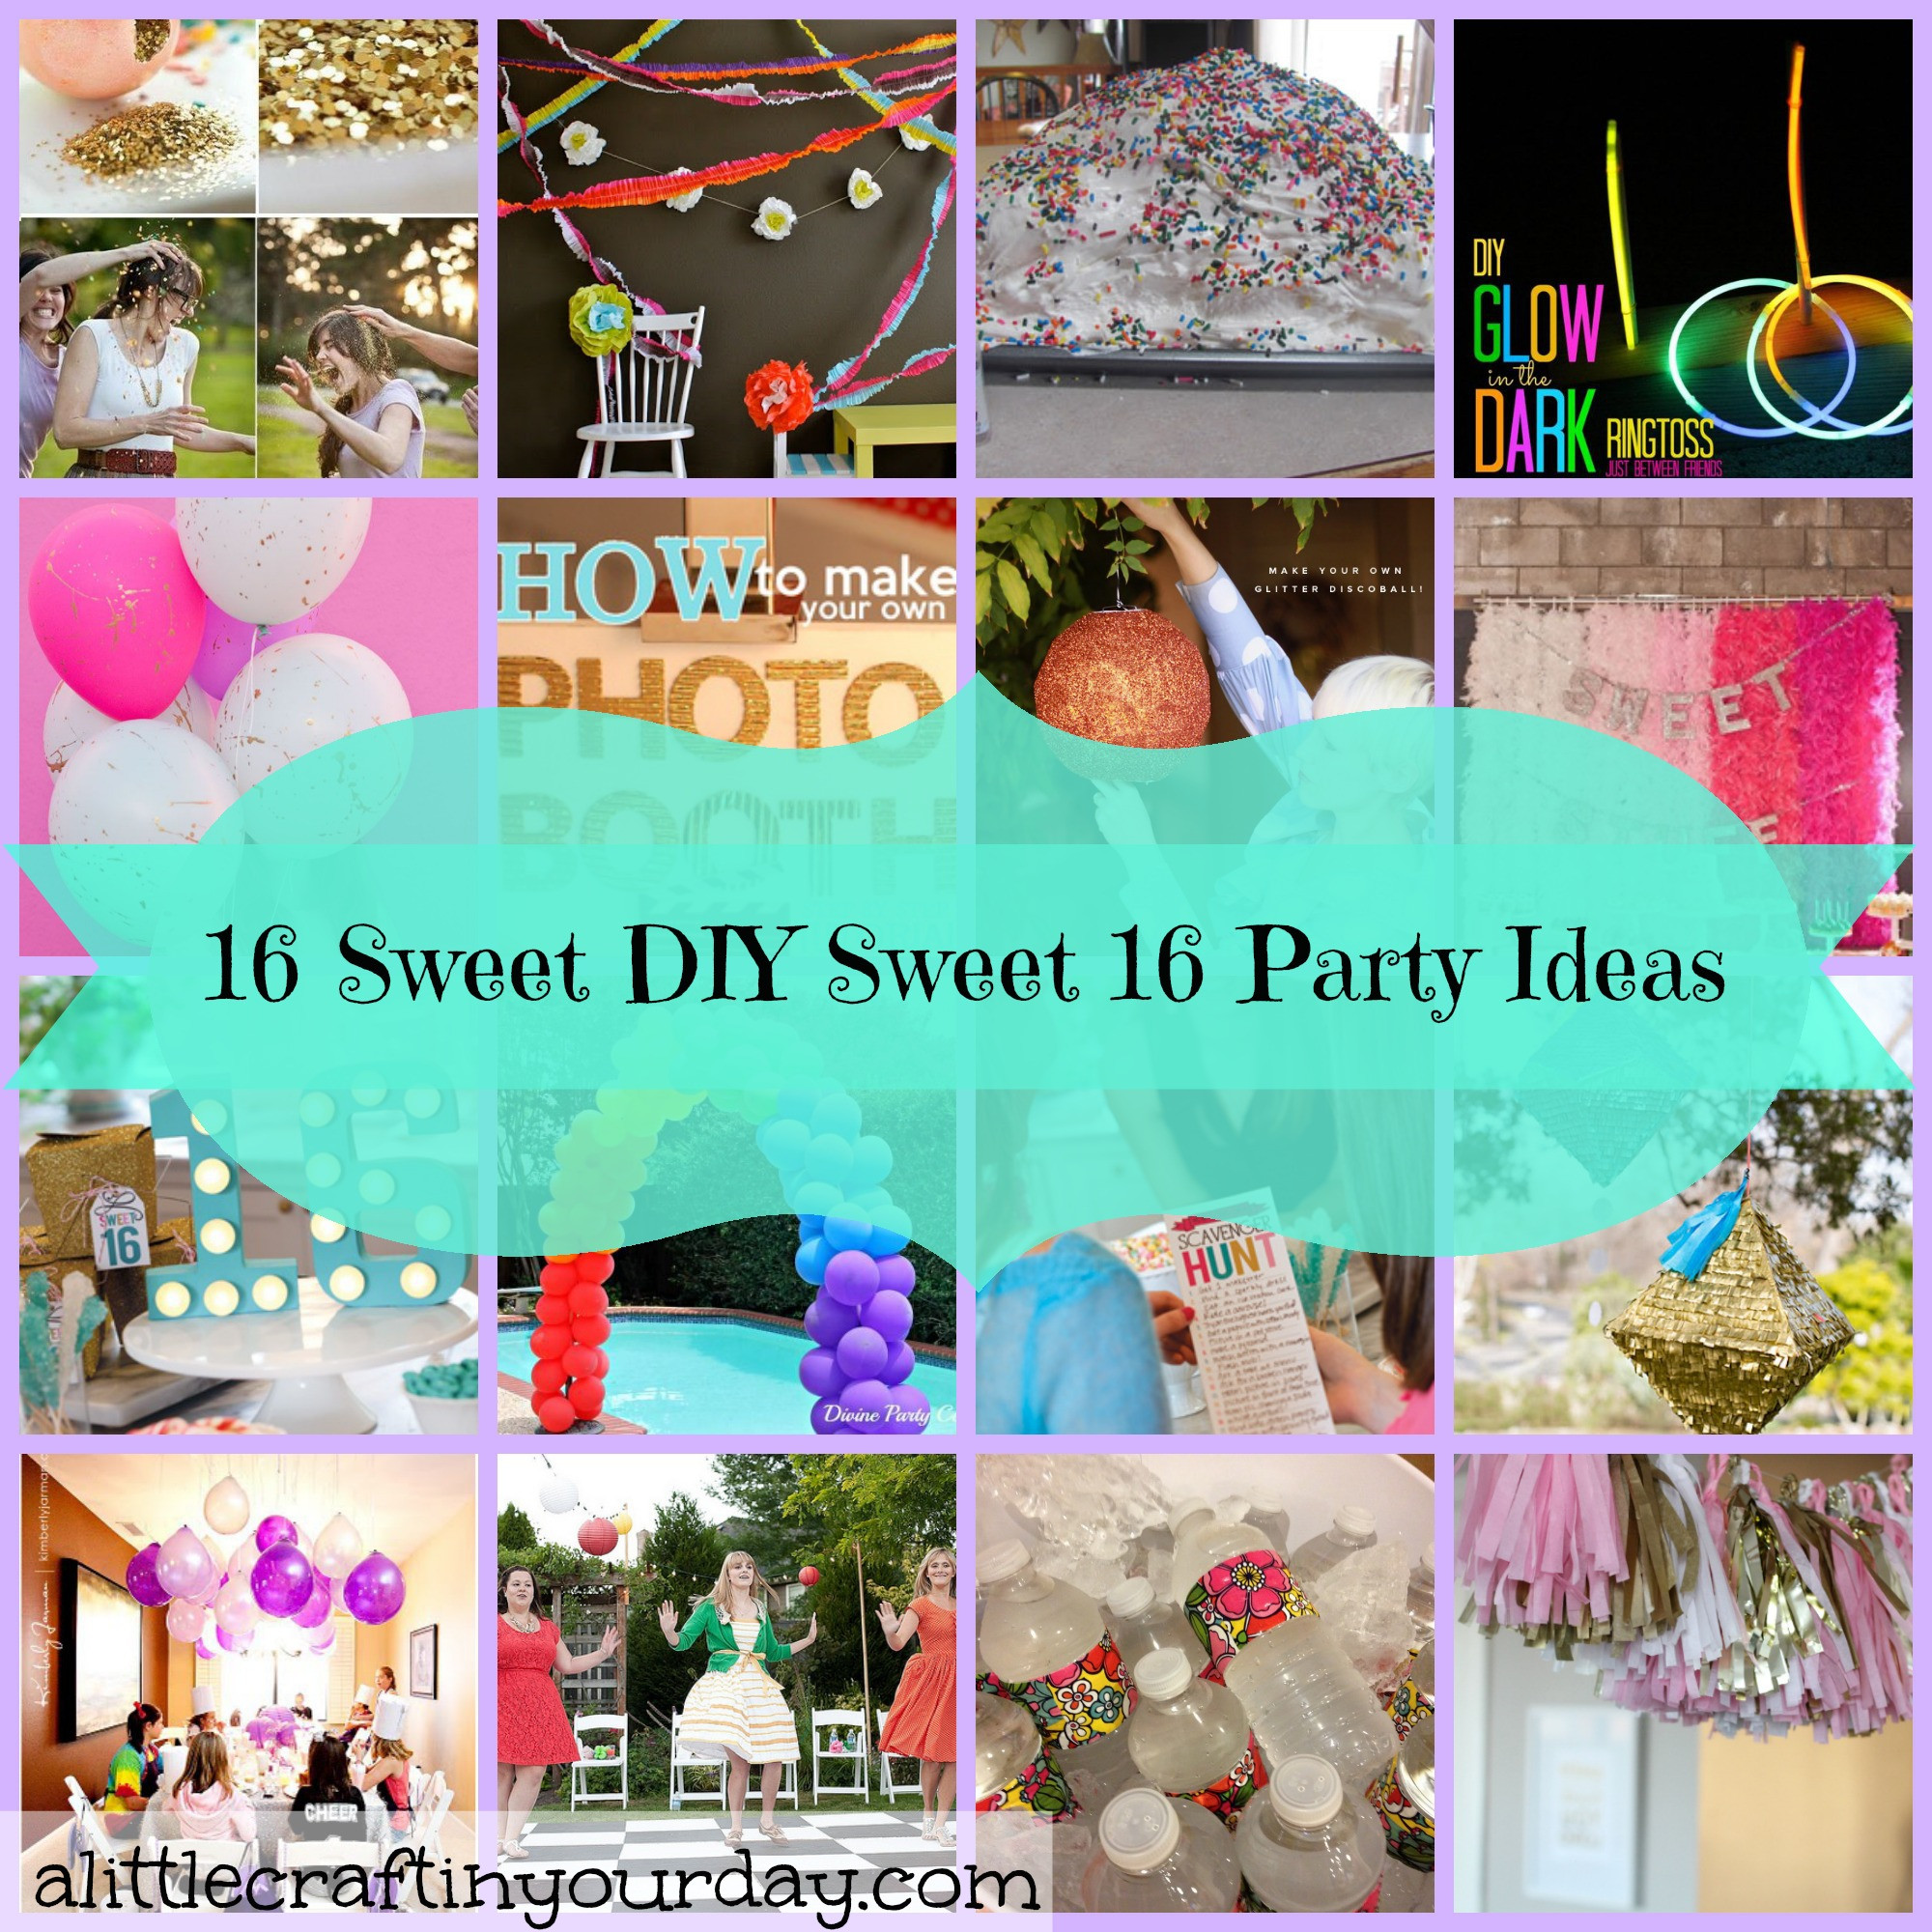 Sweet 16 Summer Party Ideas
 Sweet Sixteen Party Ideas to Favor